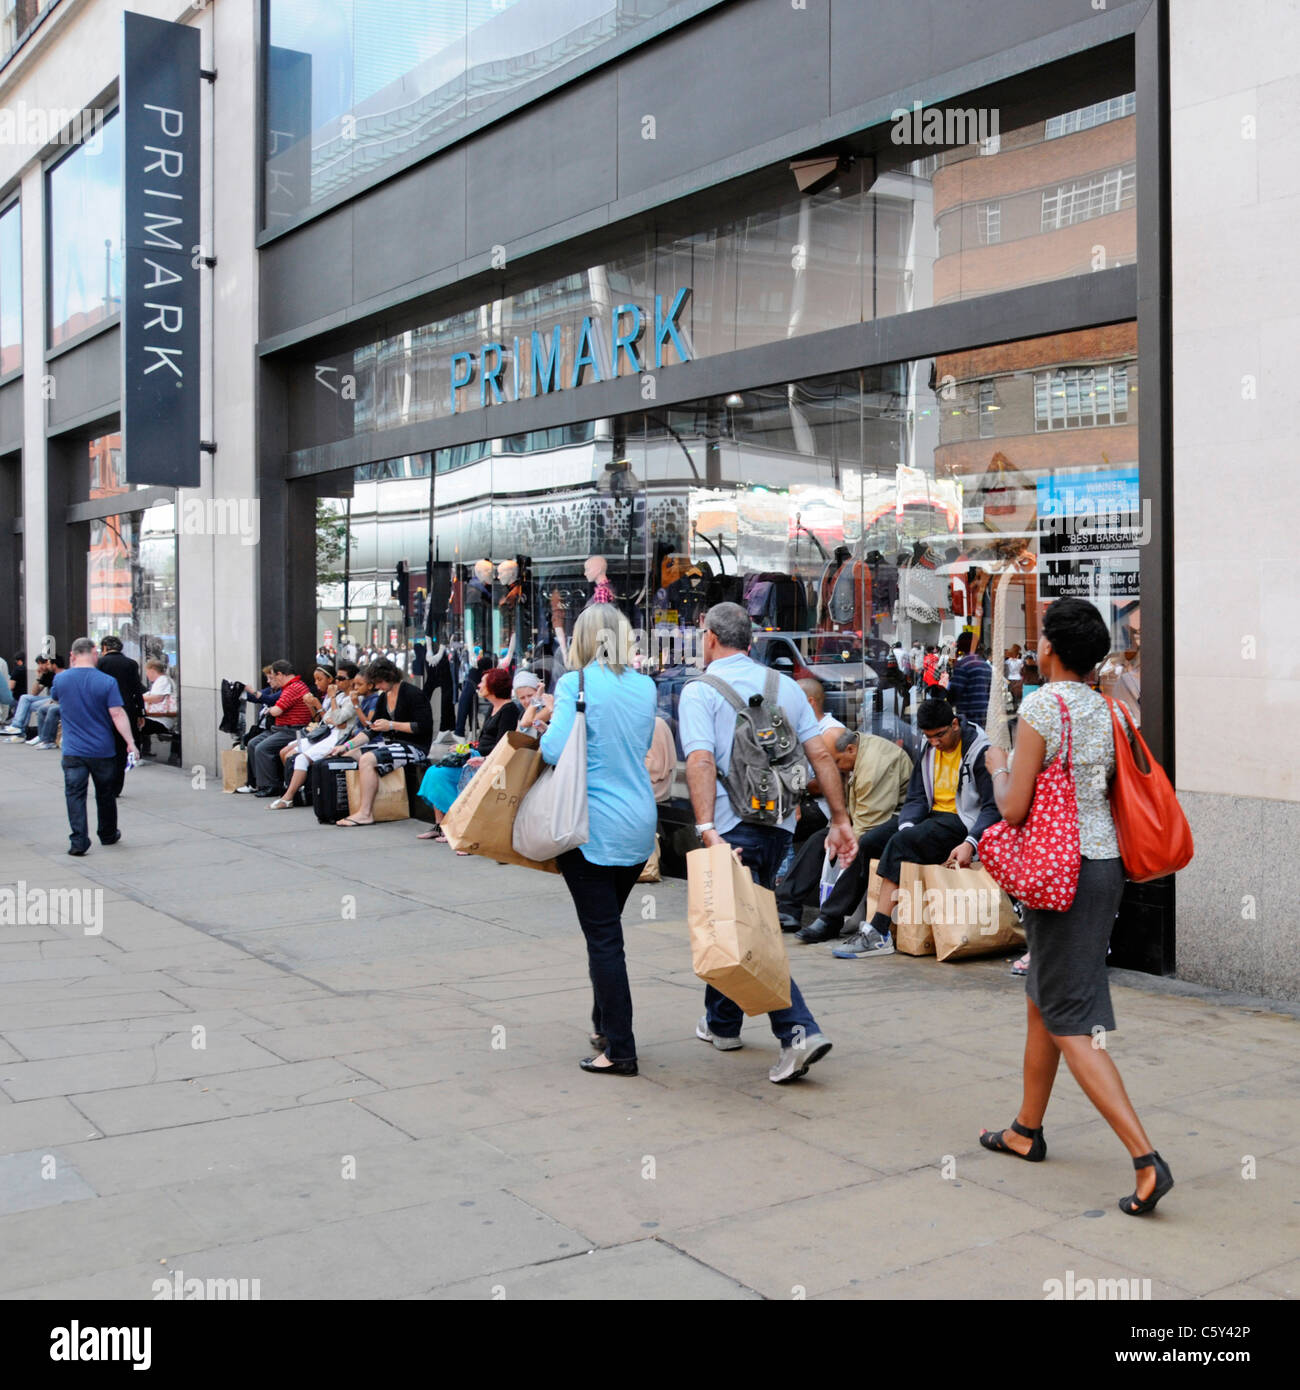 Shoppers with brown paper shopping bags walking past or sitting on window sill Primark clothing shop Oxford Street scene London West End England UK Stock Photo